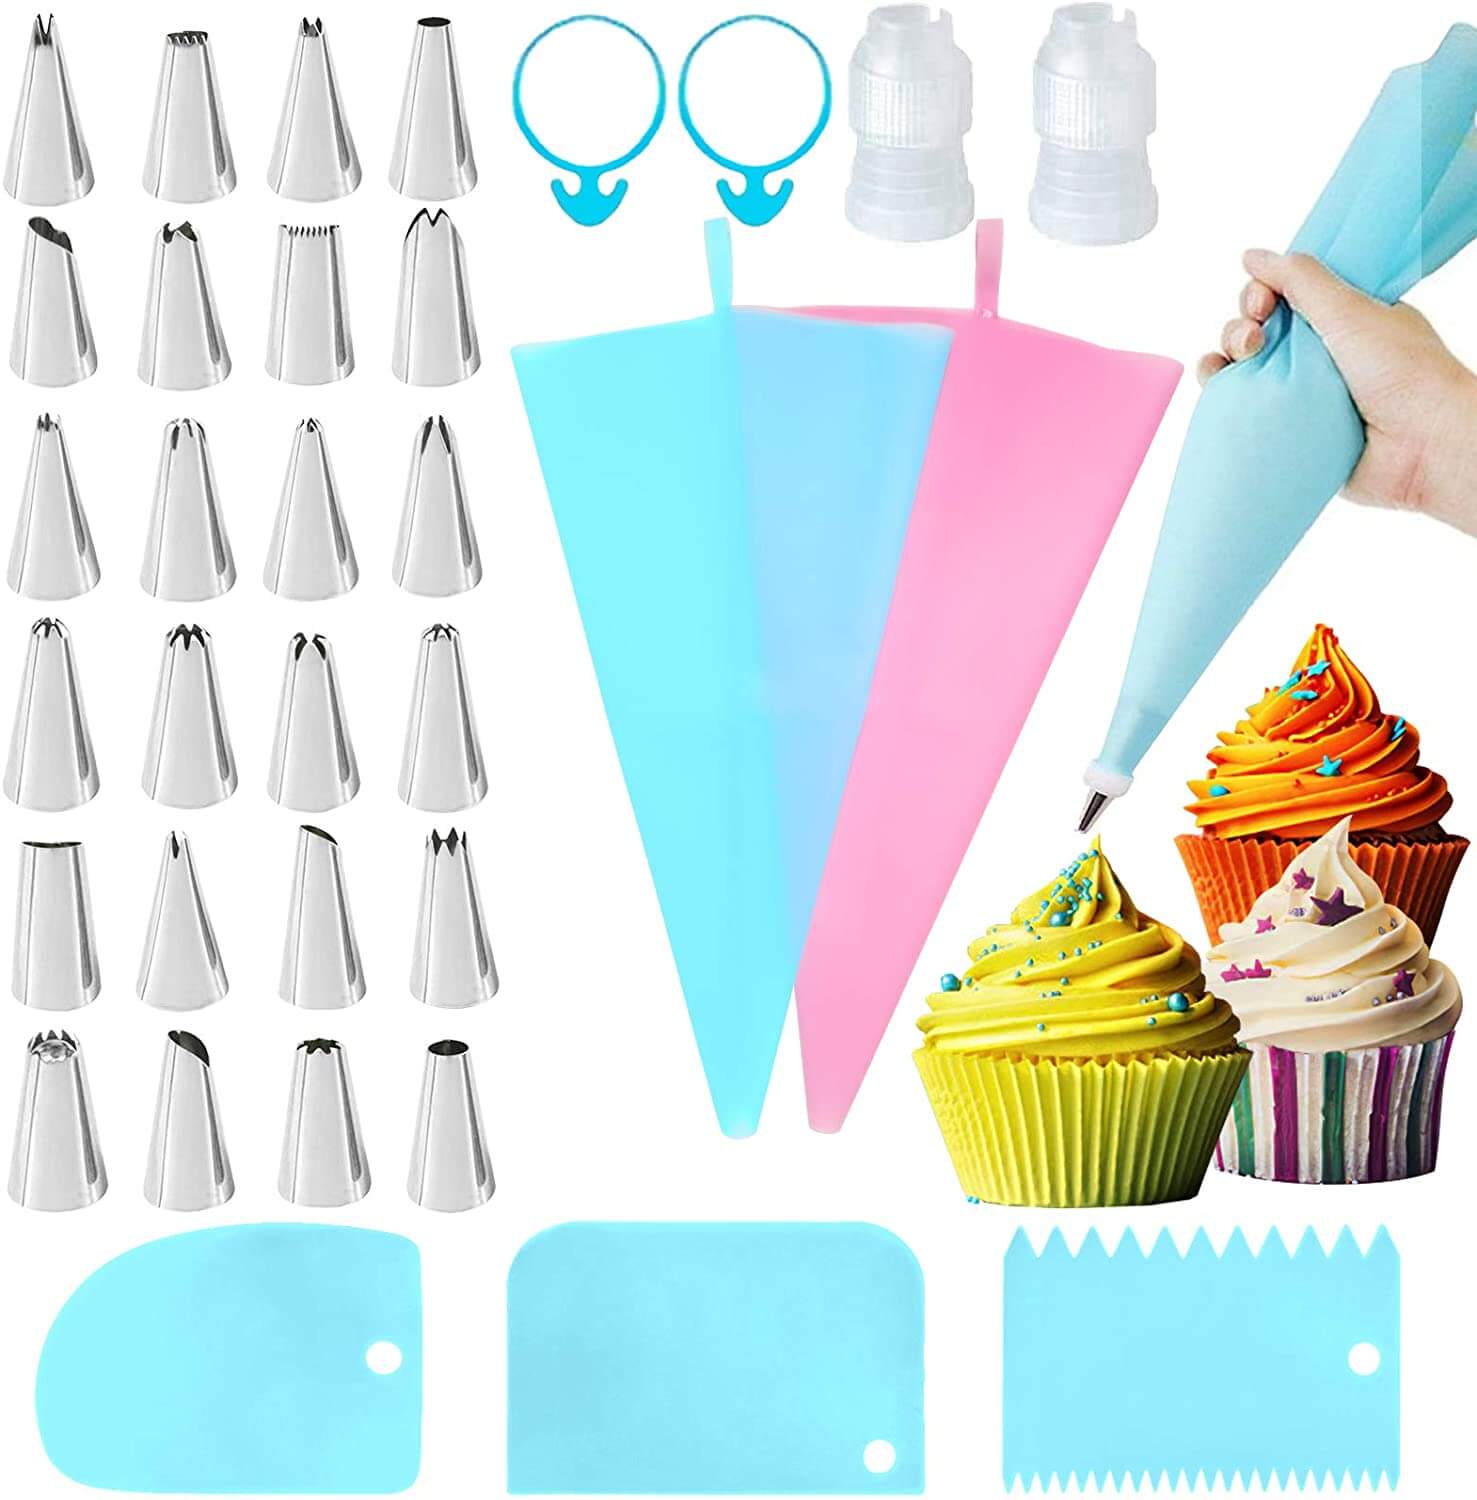 33pc Icing Piping Tip Set includes silicone piping bags and icing ...